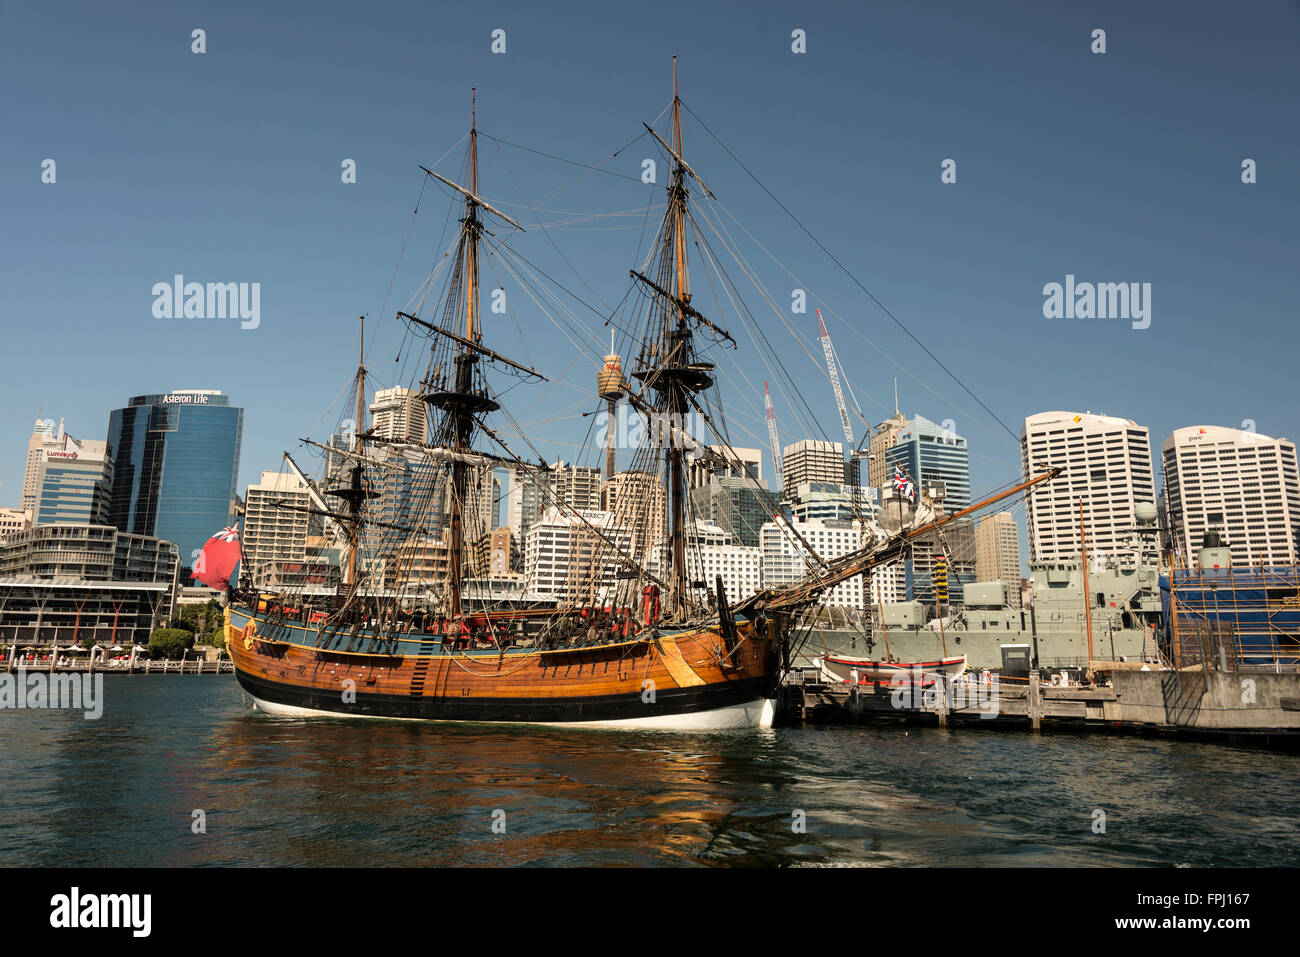 The Australian National Maritime Museum is a federally operated maritime museum in Darling Harbour, Sydney in New South Wales, A Stock Photo